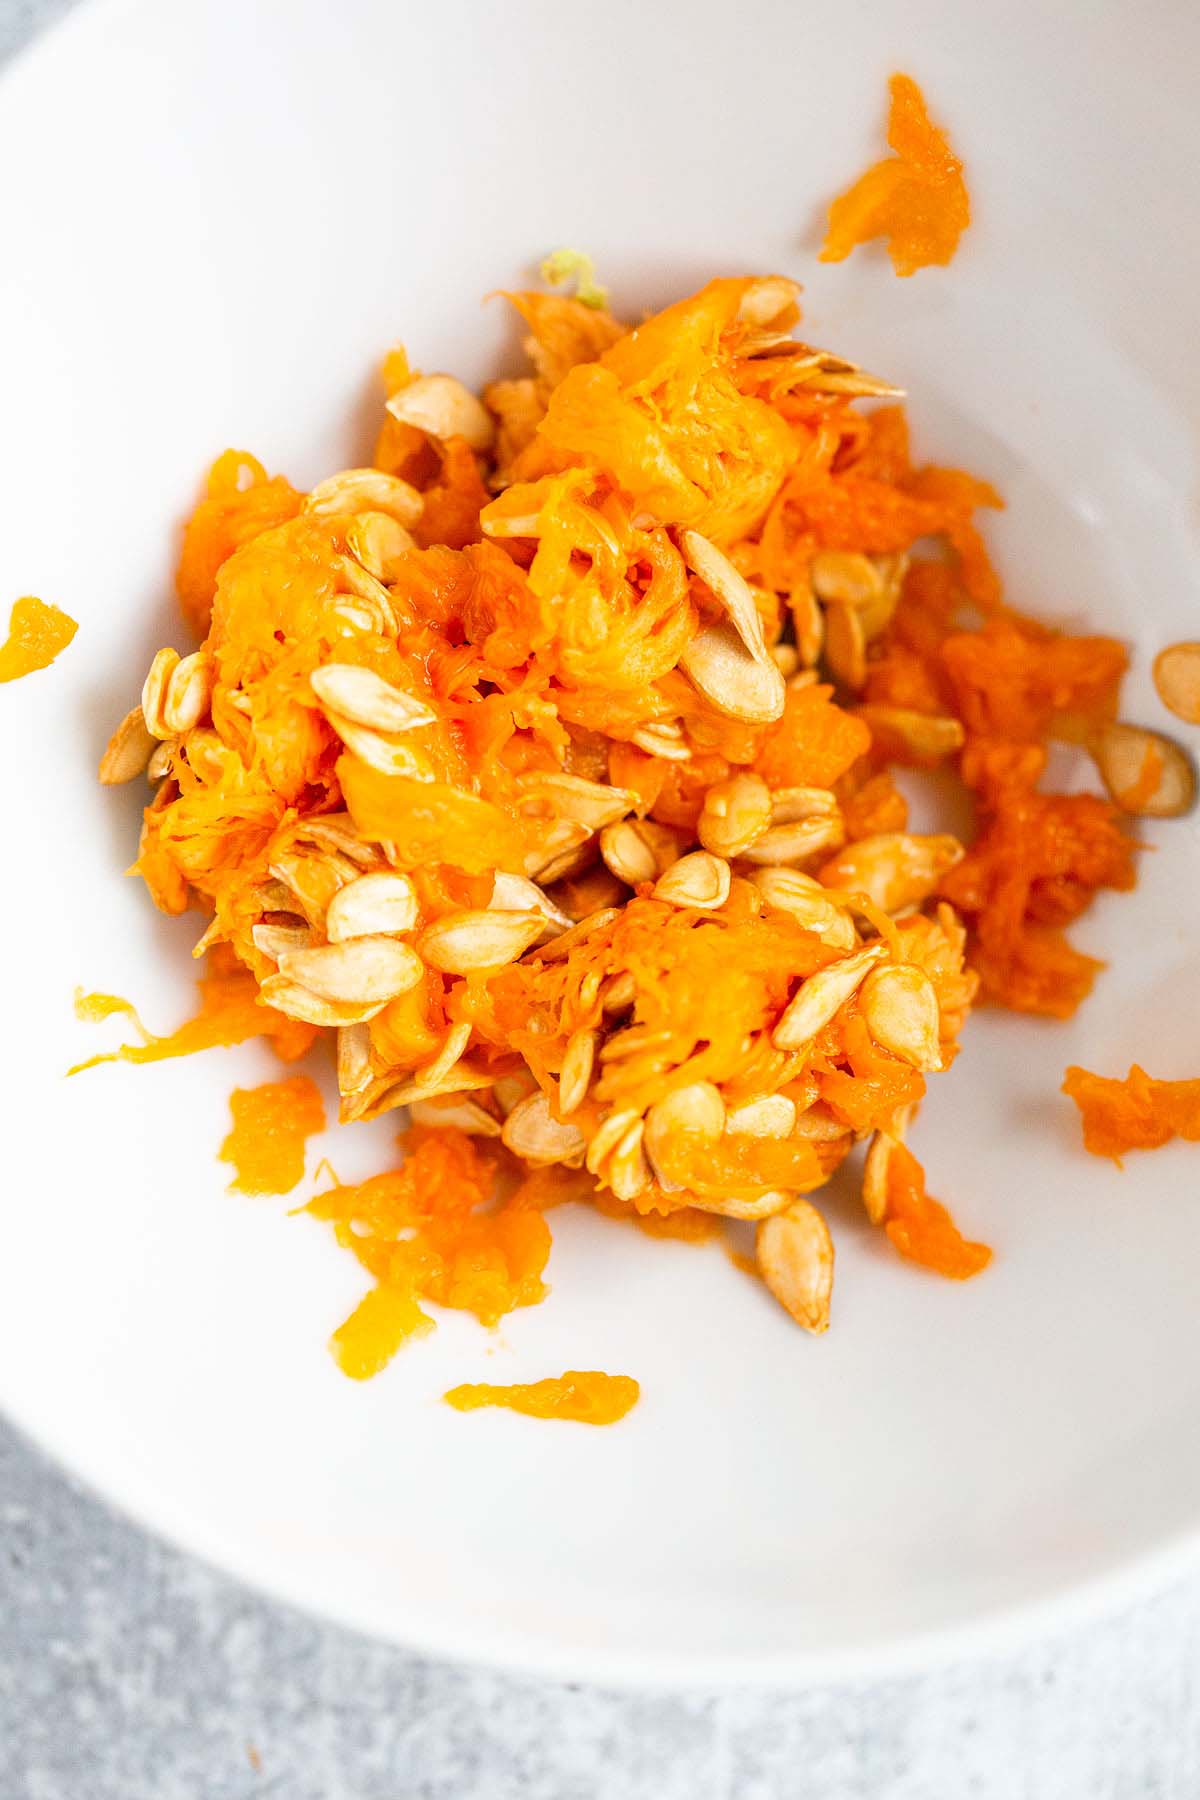 Squash pulp and seeds